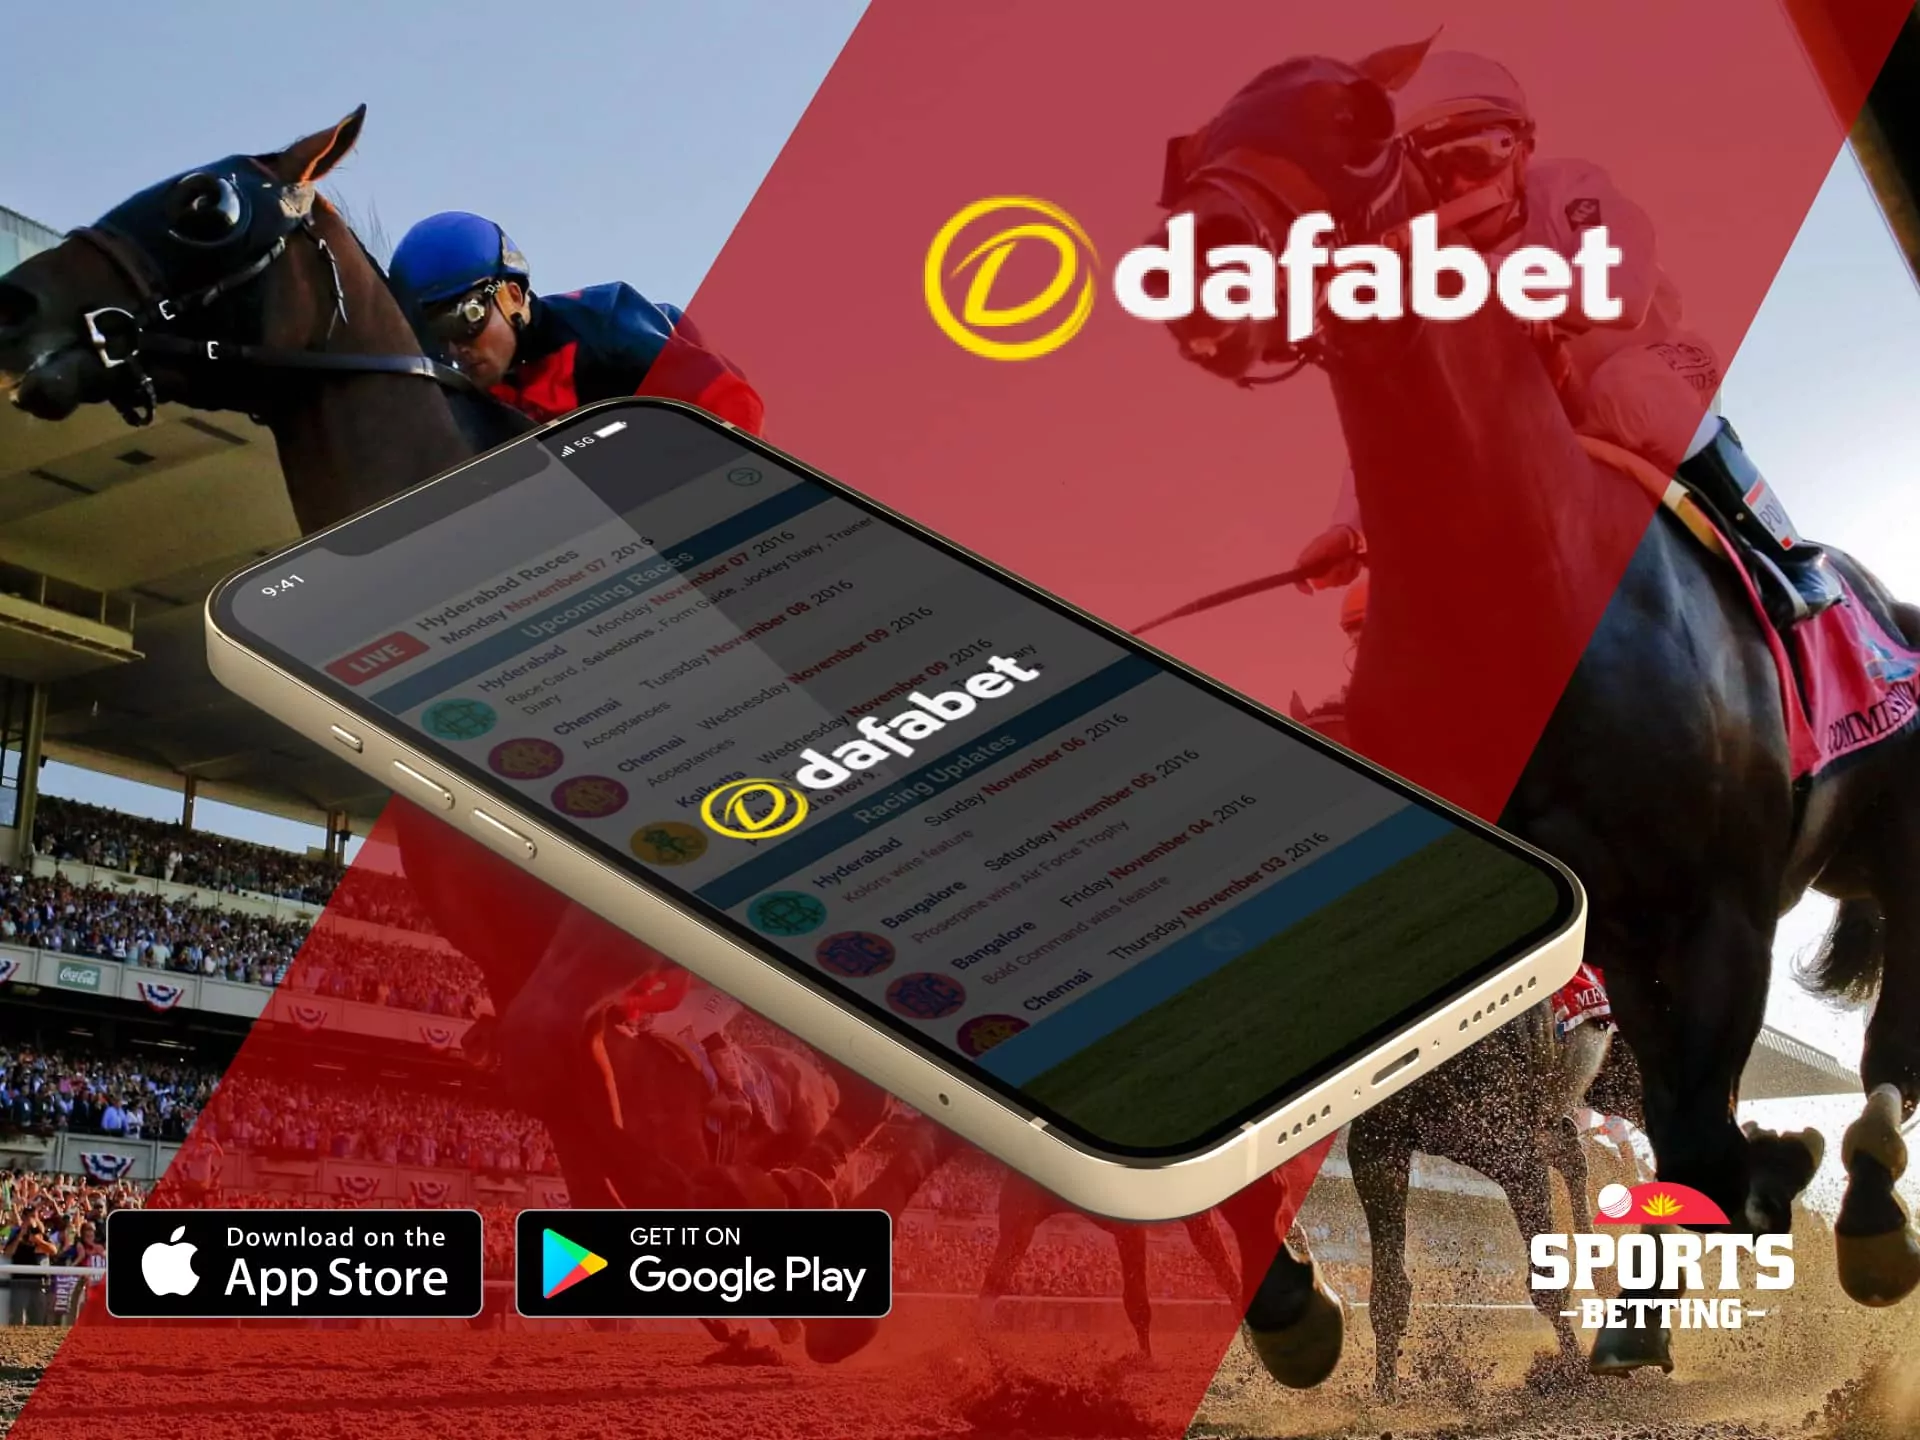 Dafabet horse racing betting site with a wide variety of horse racing betting rewards.